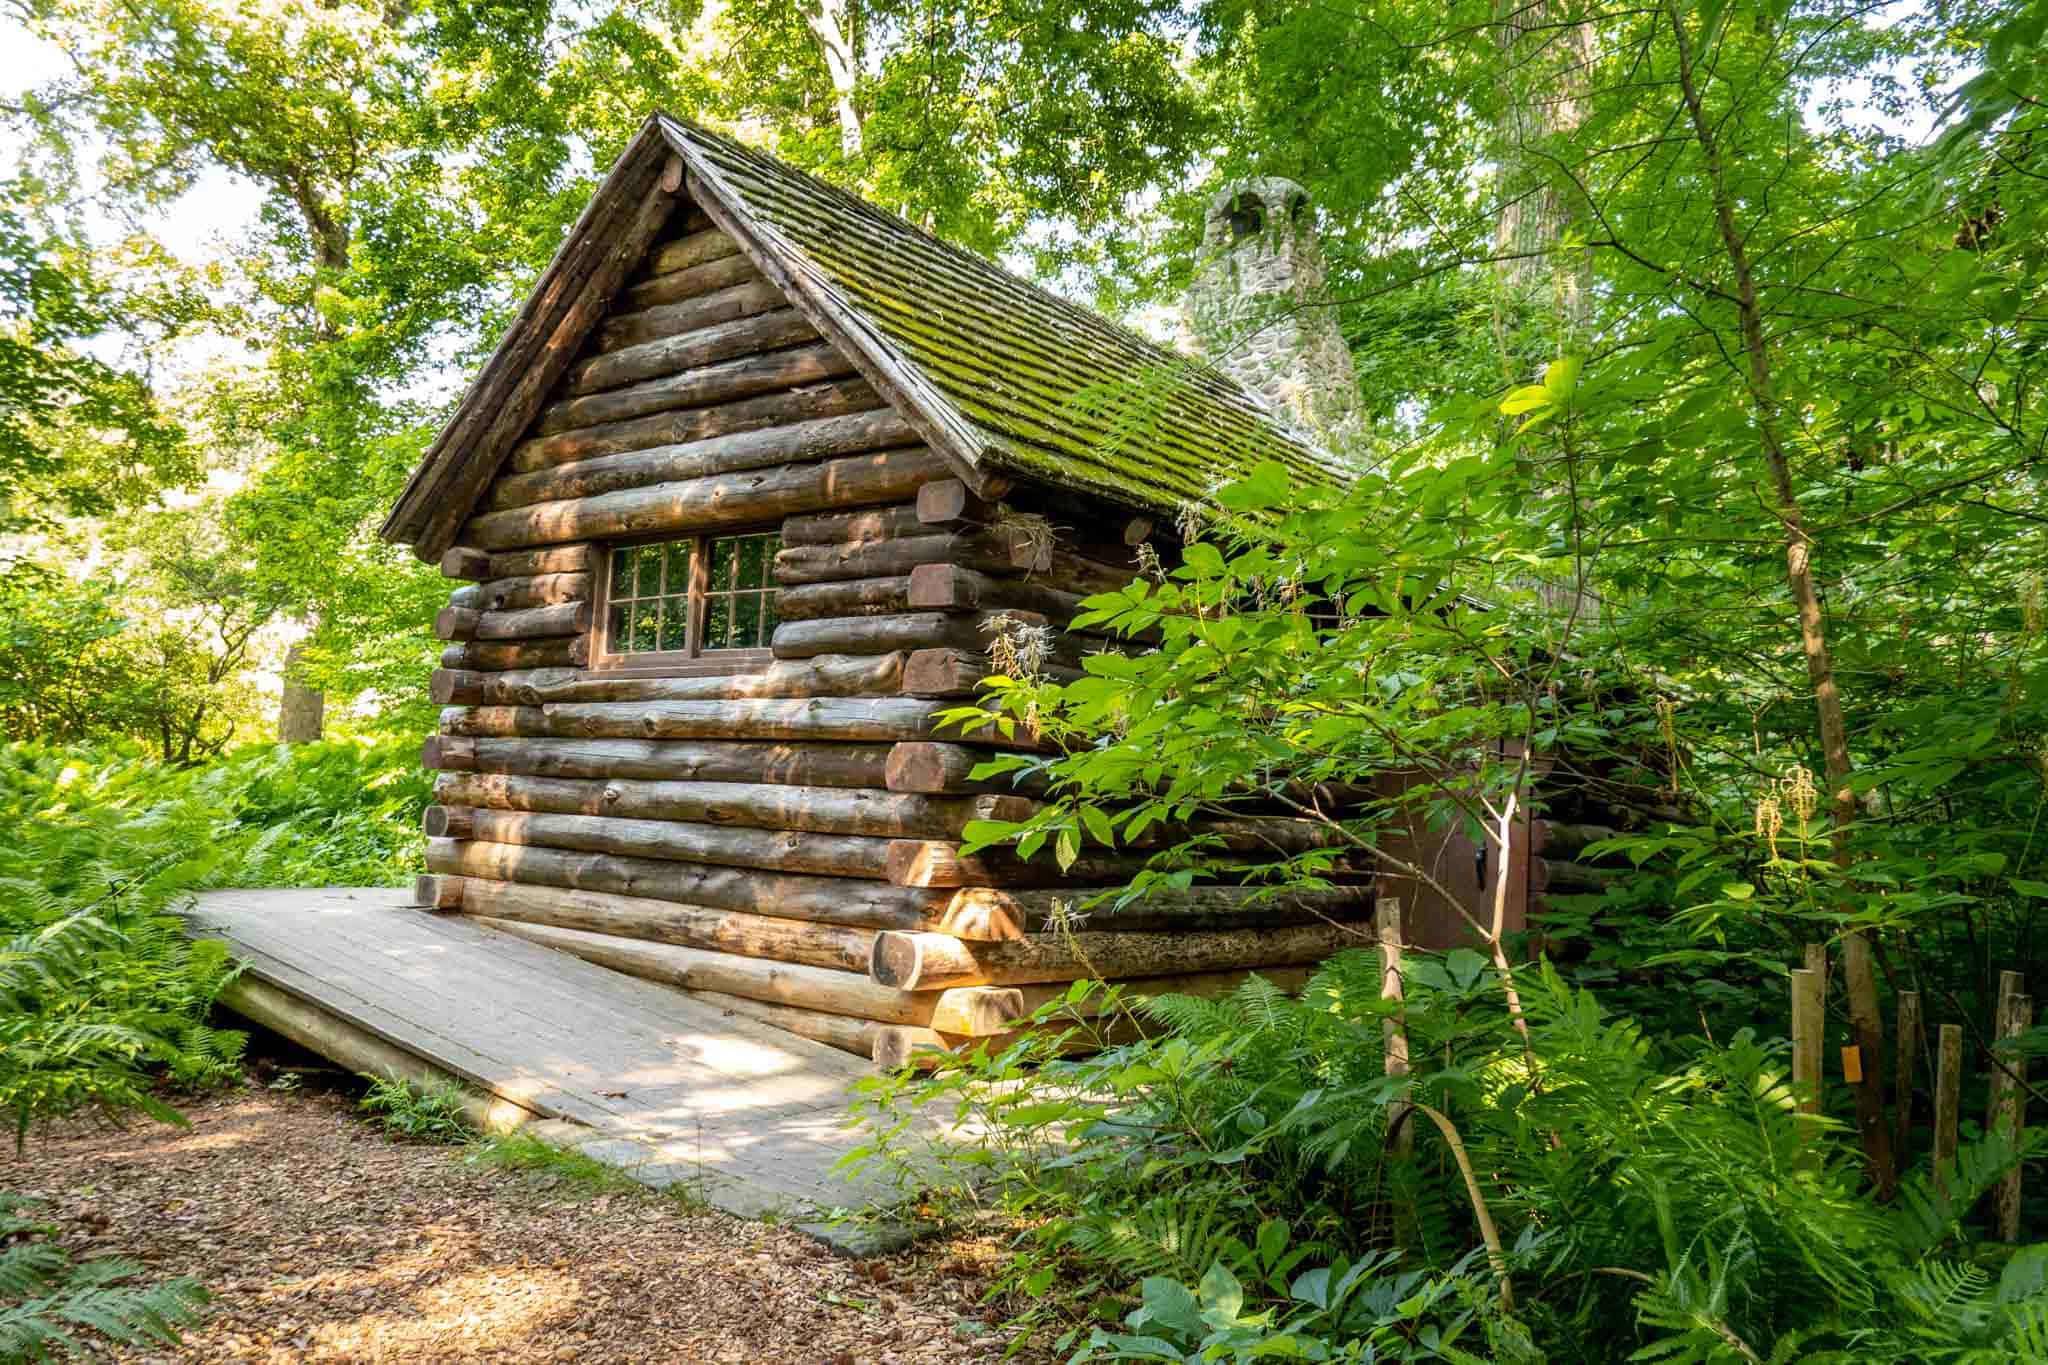 Log cabin surrounded by trees